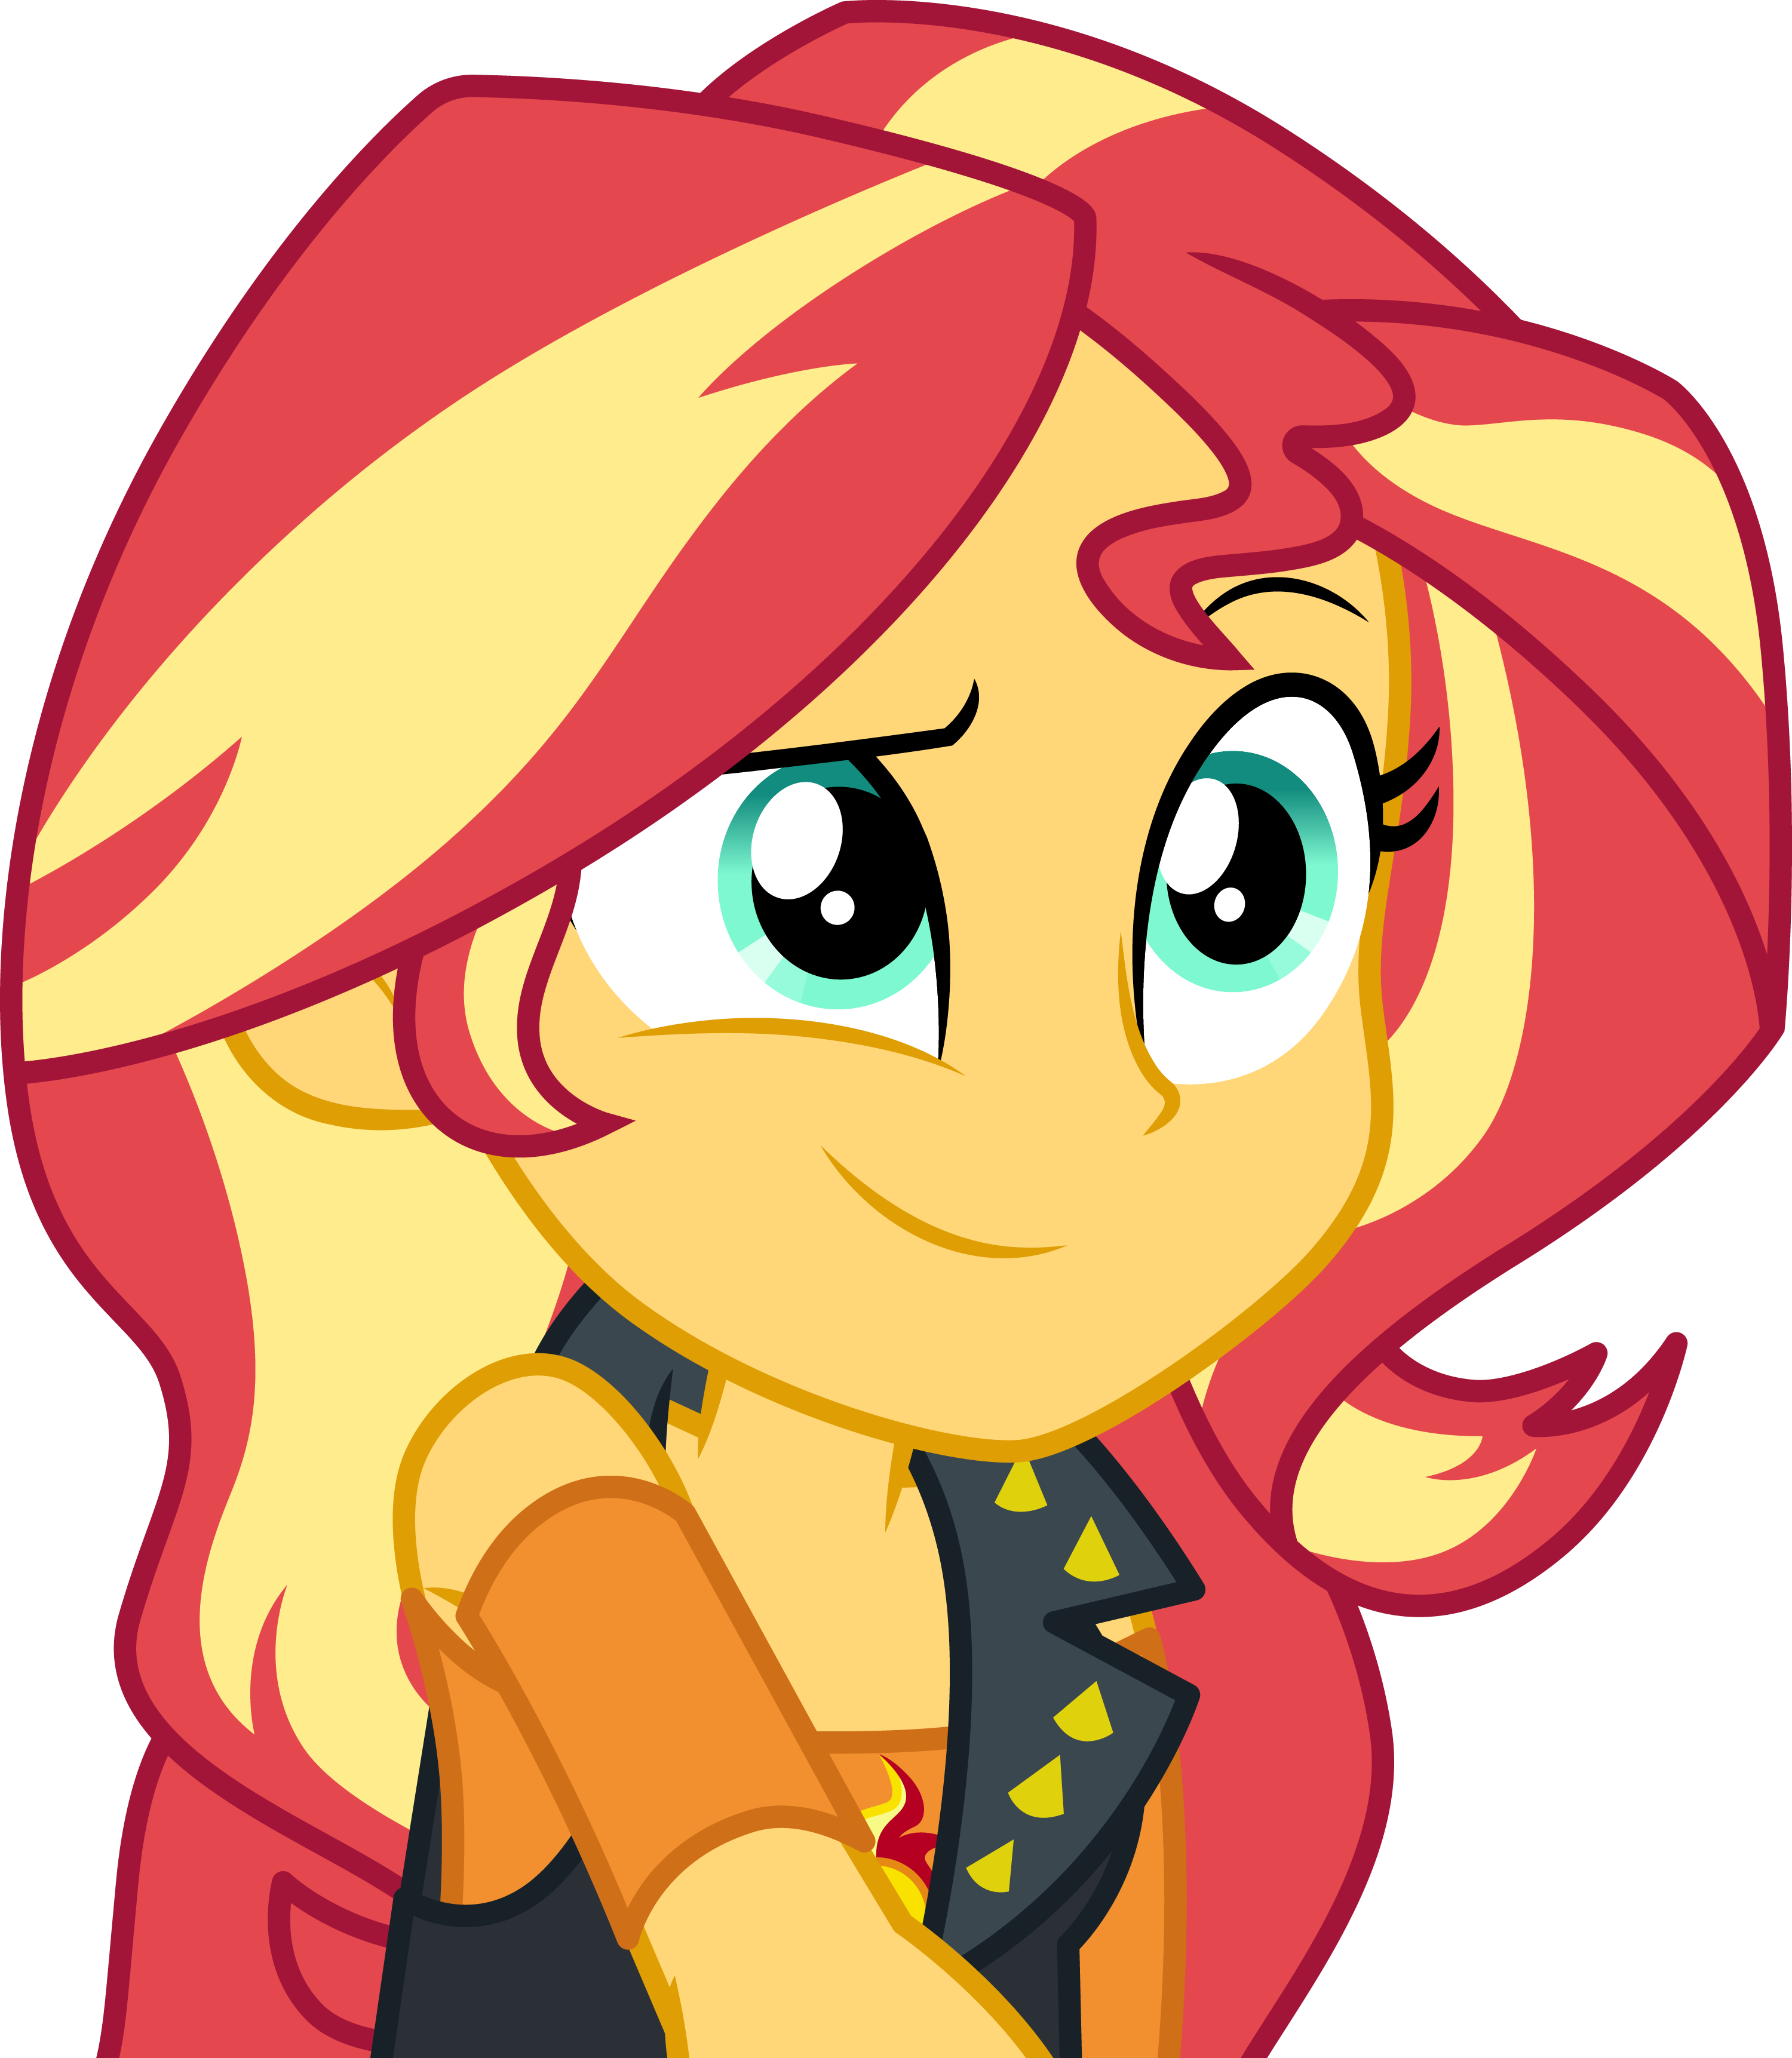 Cheer Sunset Shimmer On by CloudyGlow on DeviantArt